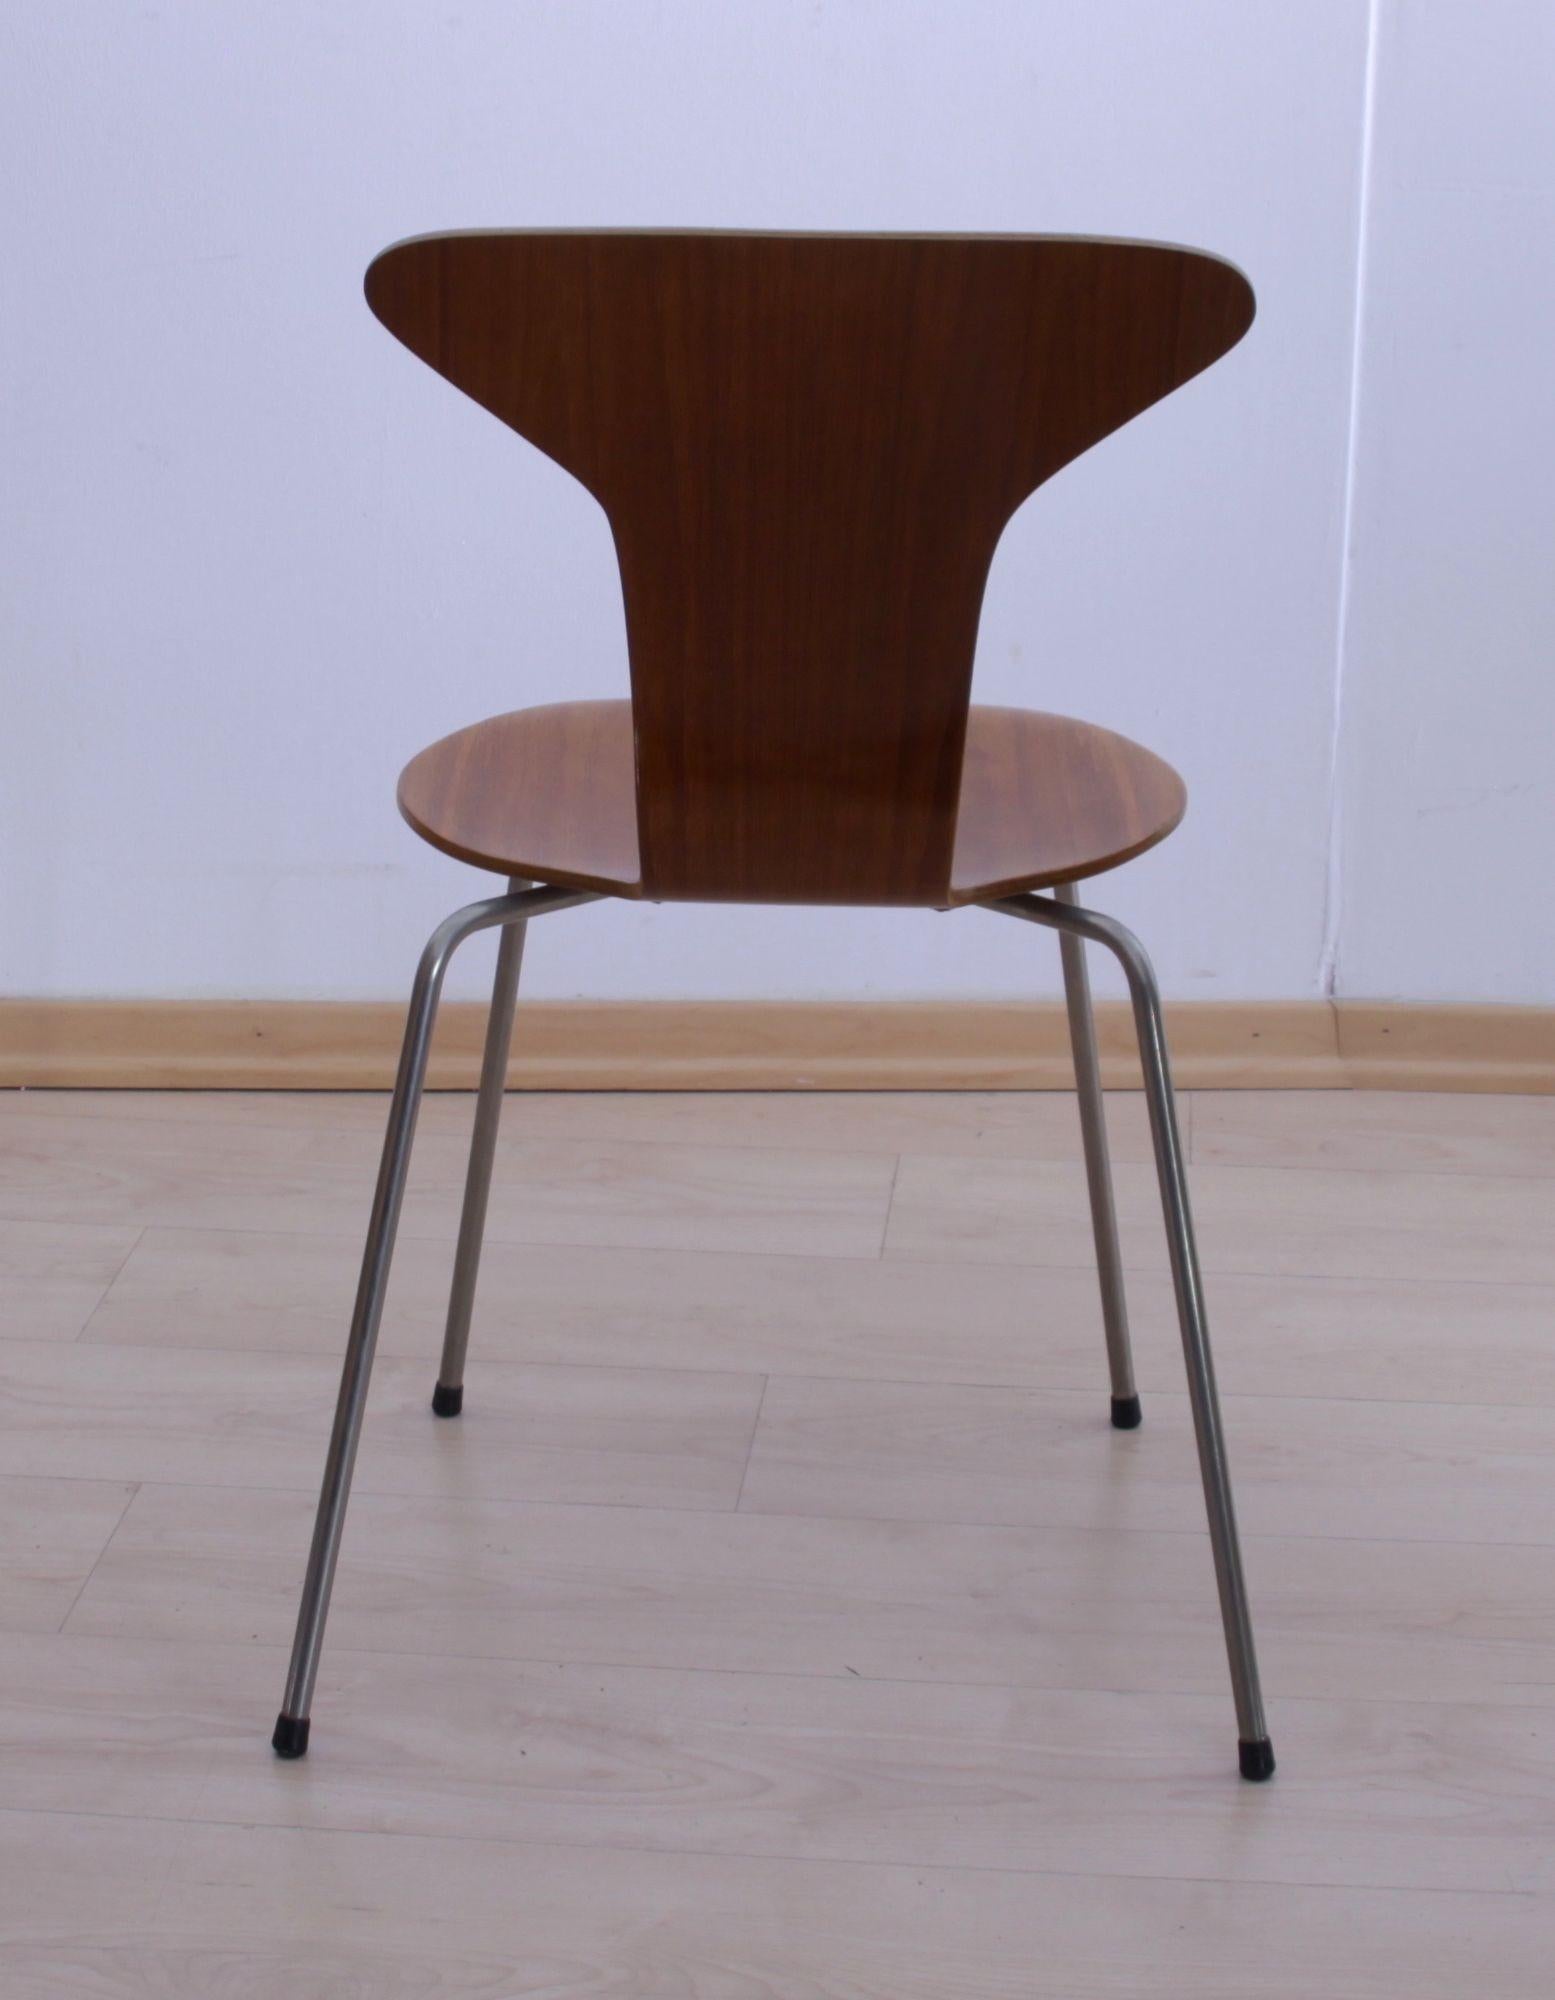 Polished Pair of 3105 'Mosquito' Chairs by Arne Jacobsen, F. Hansen, Teak, Denmark, 1950s For Sale